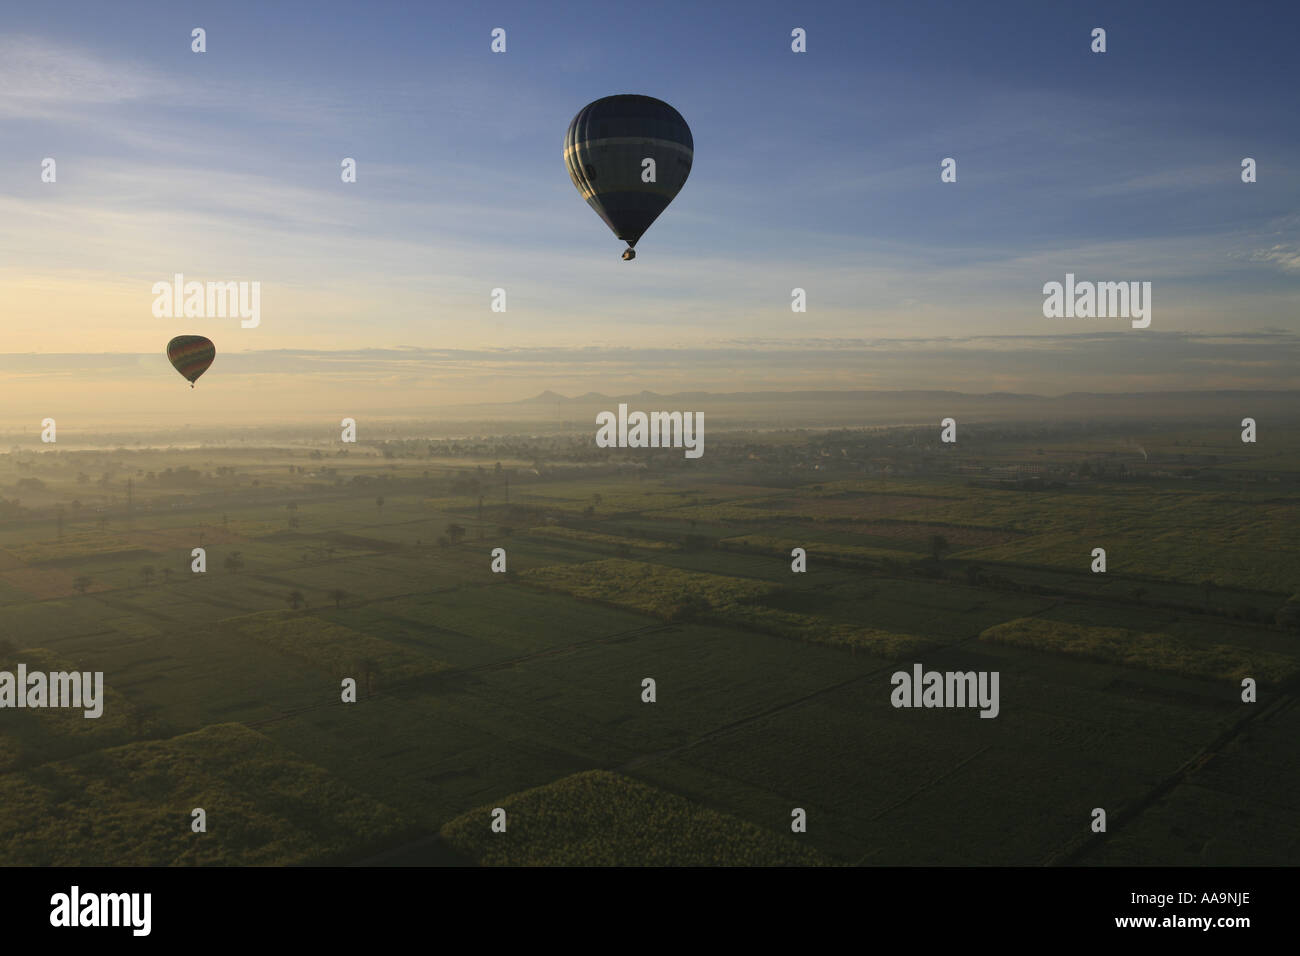 Hot Air Ballooning over fields, villages and ancient monuments in Egypt. Stock Photo